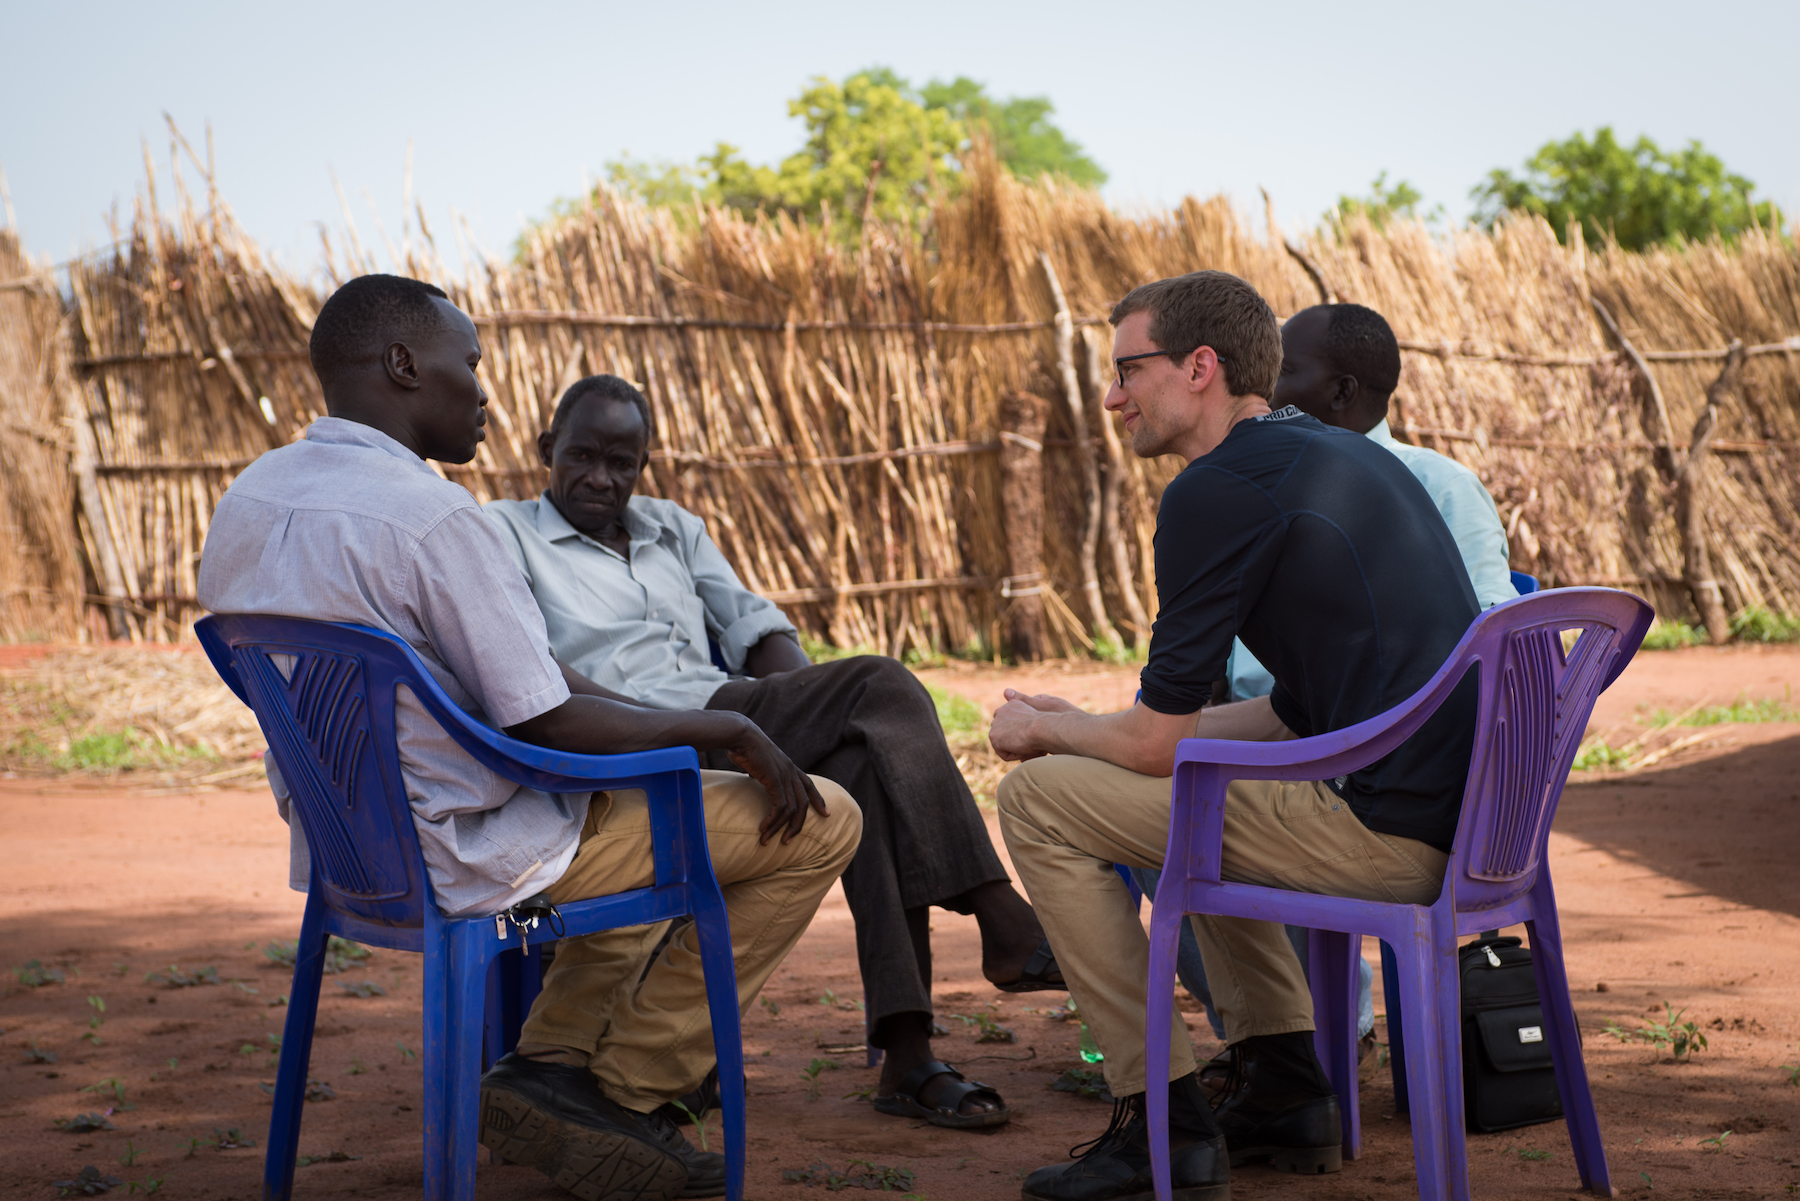 Mark Hackett, meeting with leaders in South Sudan